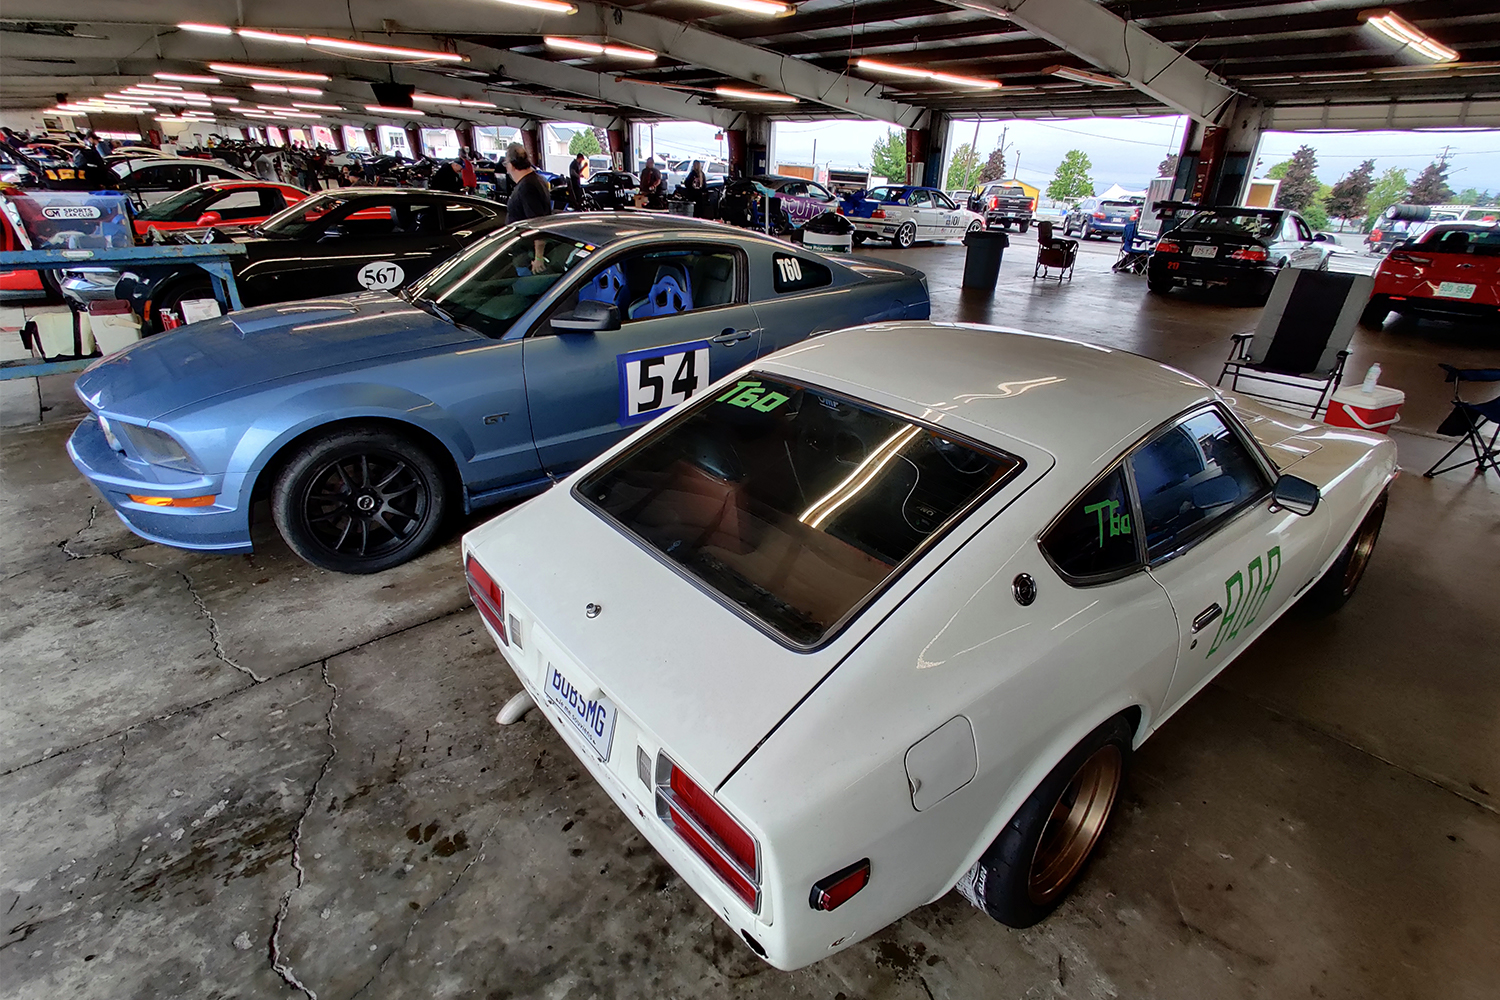 My 1978 Datsun 280Z next to my father's 2005 Ford Mustang GT in the garage at Watkins Glen International